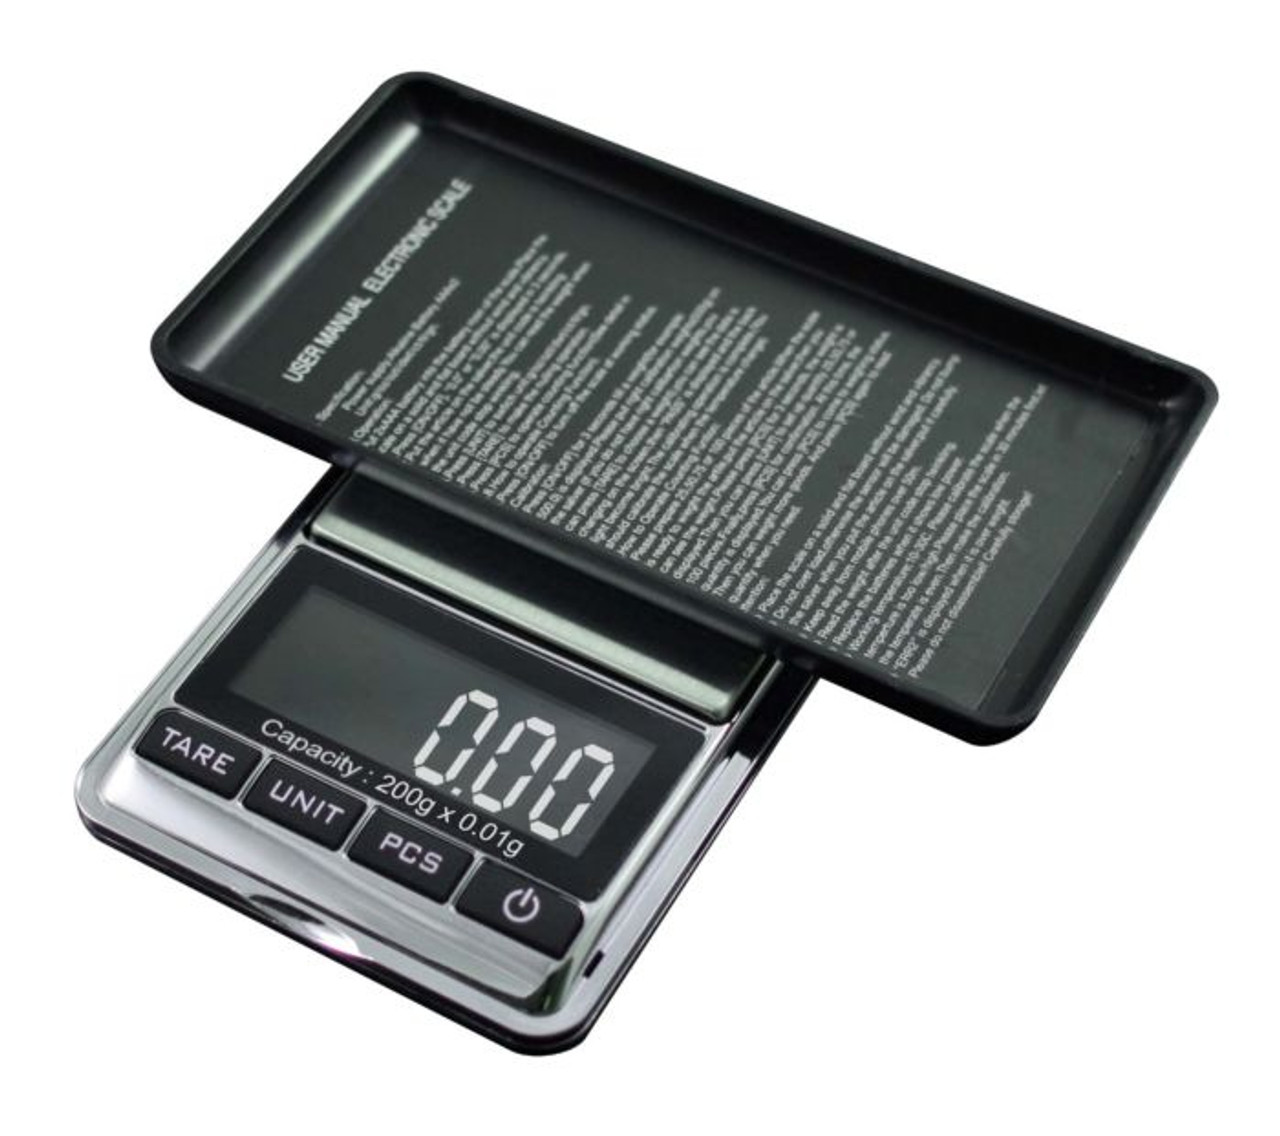 Series Digital Pocket Weight Scale, Stainless Steel - AC-650-BLK - 650G X  0.1G - (Black) - AMERICAN WEIGH SCALES